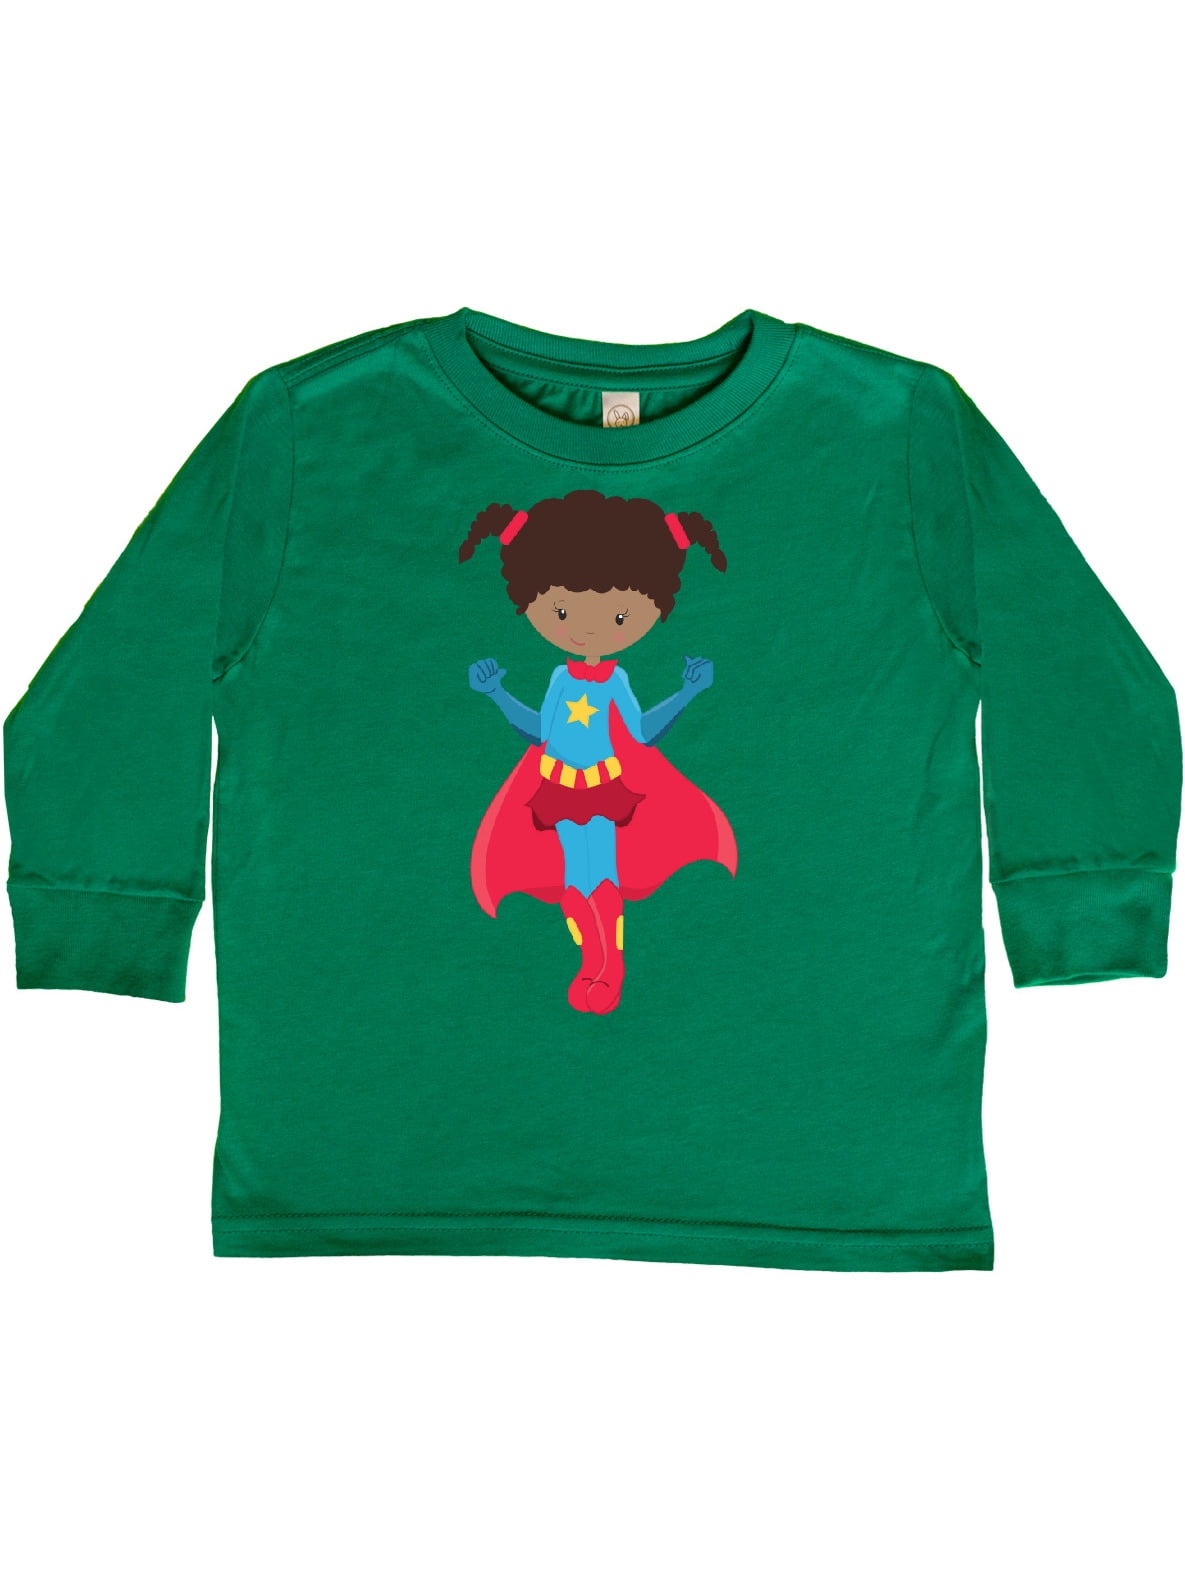 toddler girl superhero shirts with capes